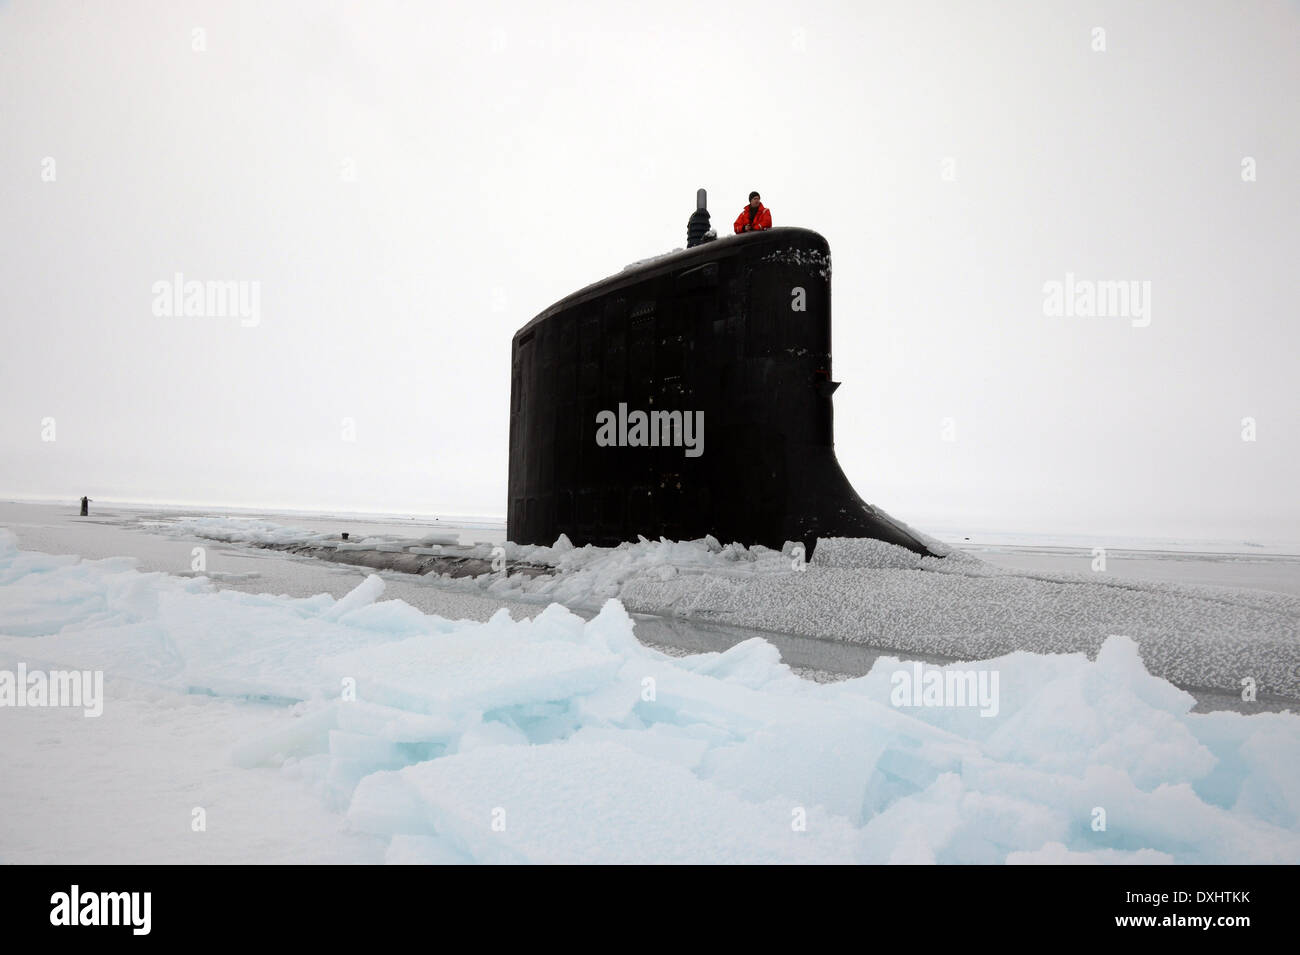 US Navy Virginia-class nuclear attack submarine USS New Mexico surfaces through the arctic ice during training exercise ICEX 2014 March 22, 2014 off the coast of Alaska. Stock Photo